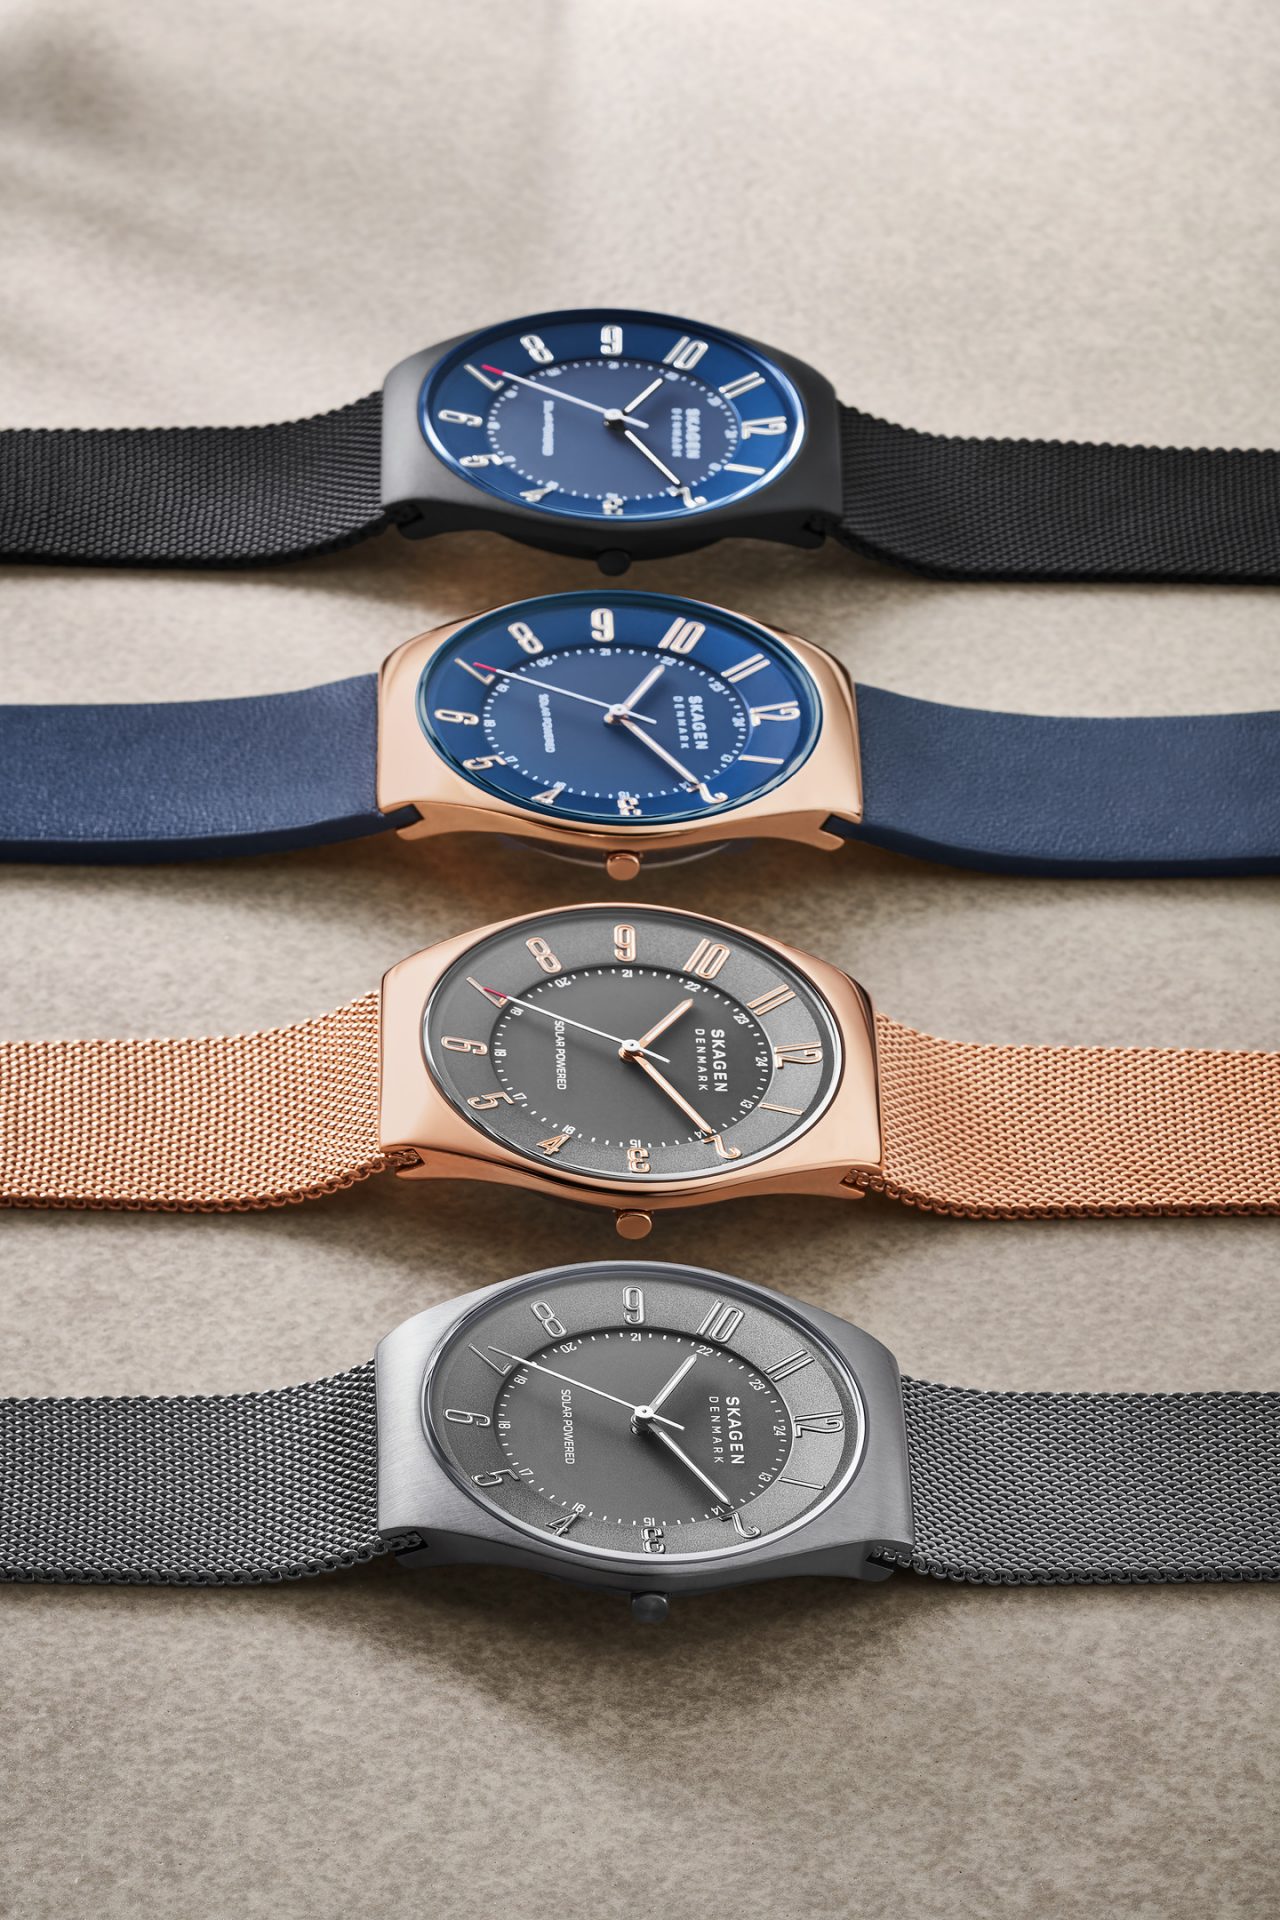 Of Grenen Part As Collection New Incorporates Power Skagen Solar